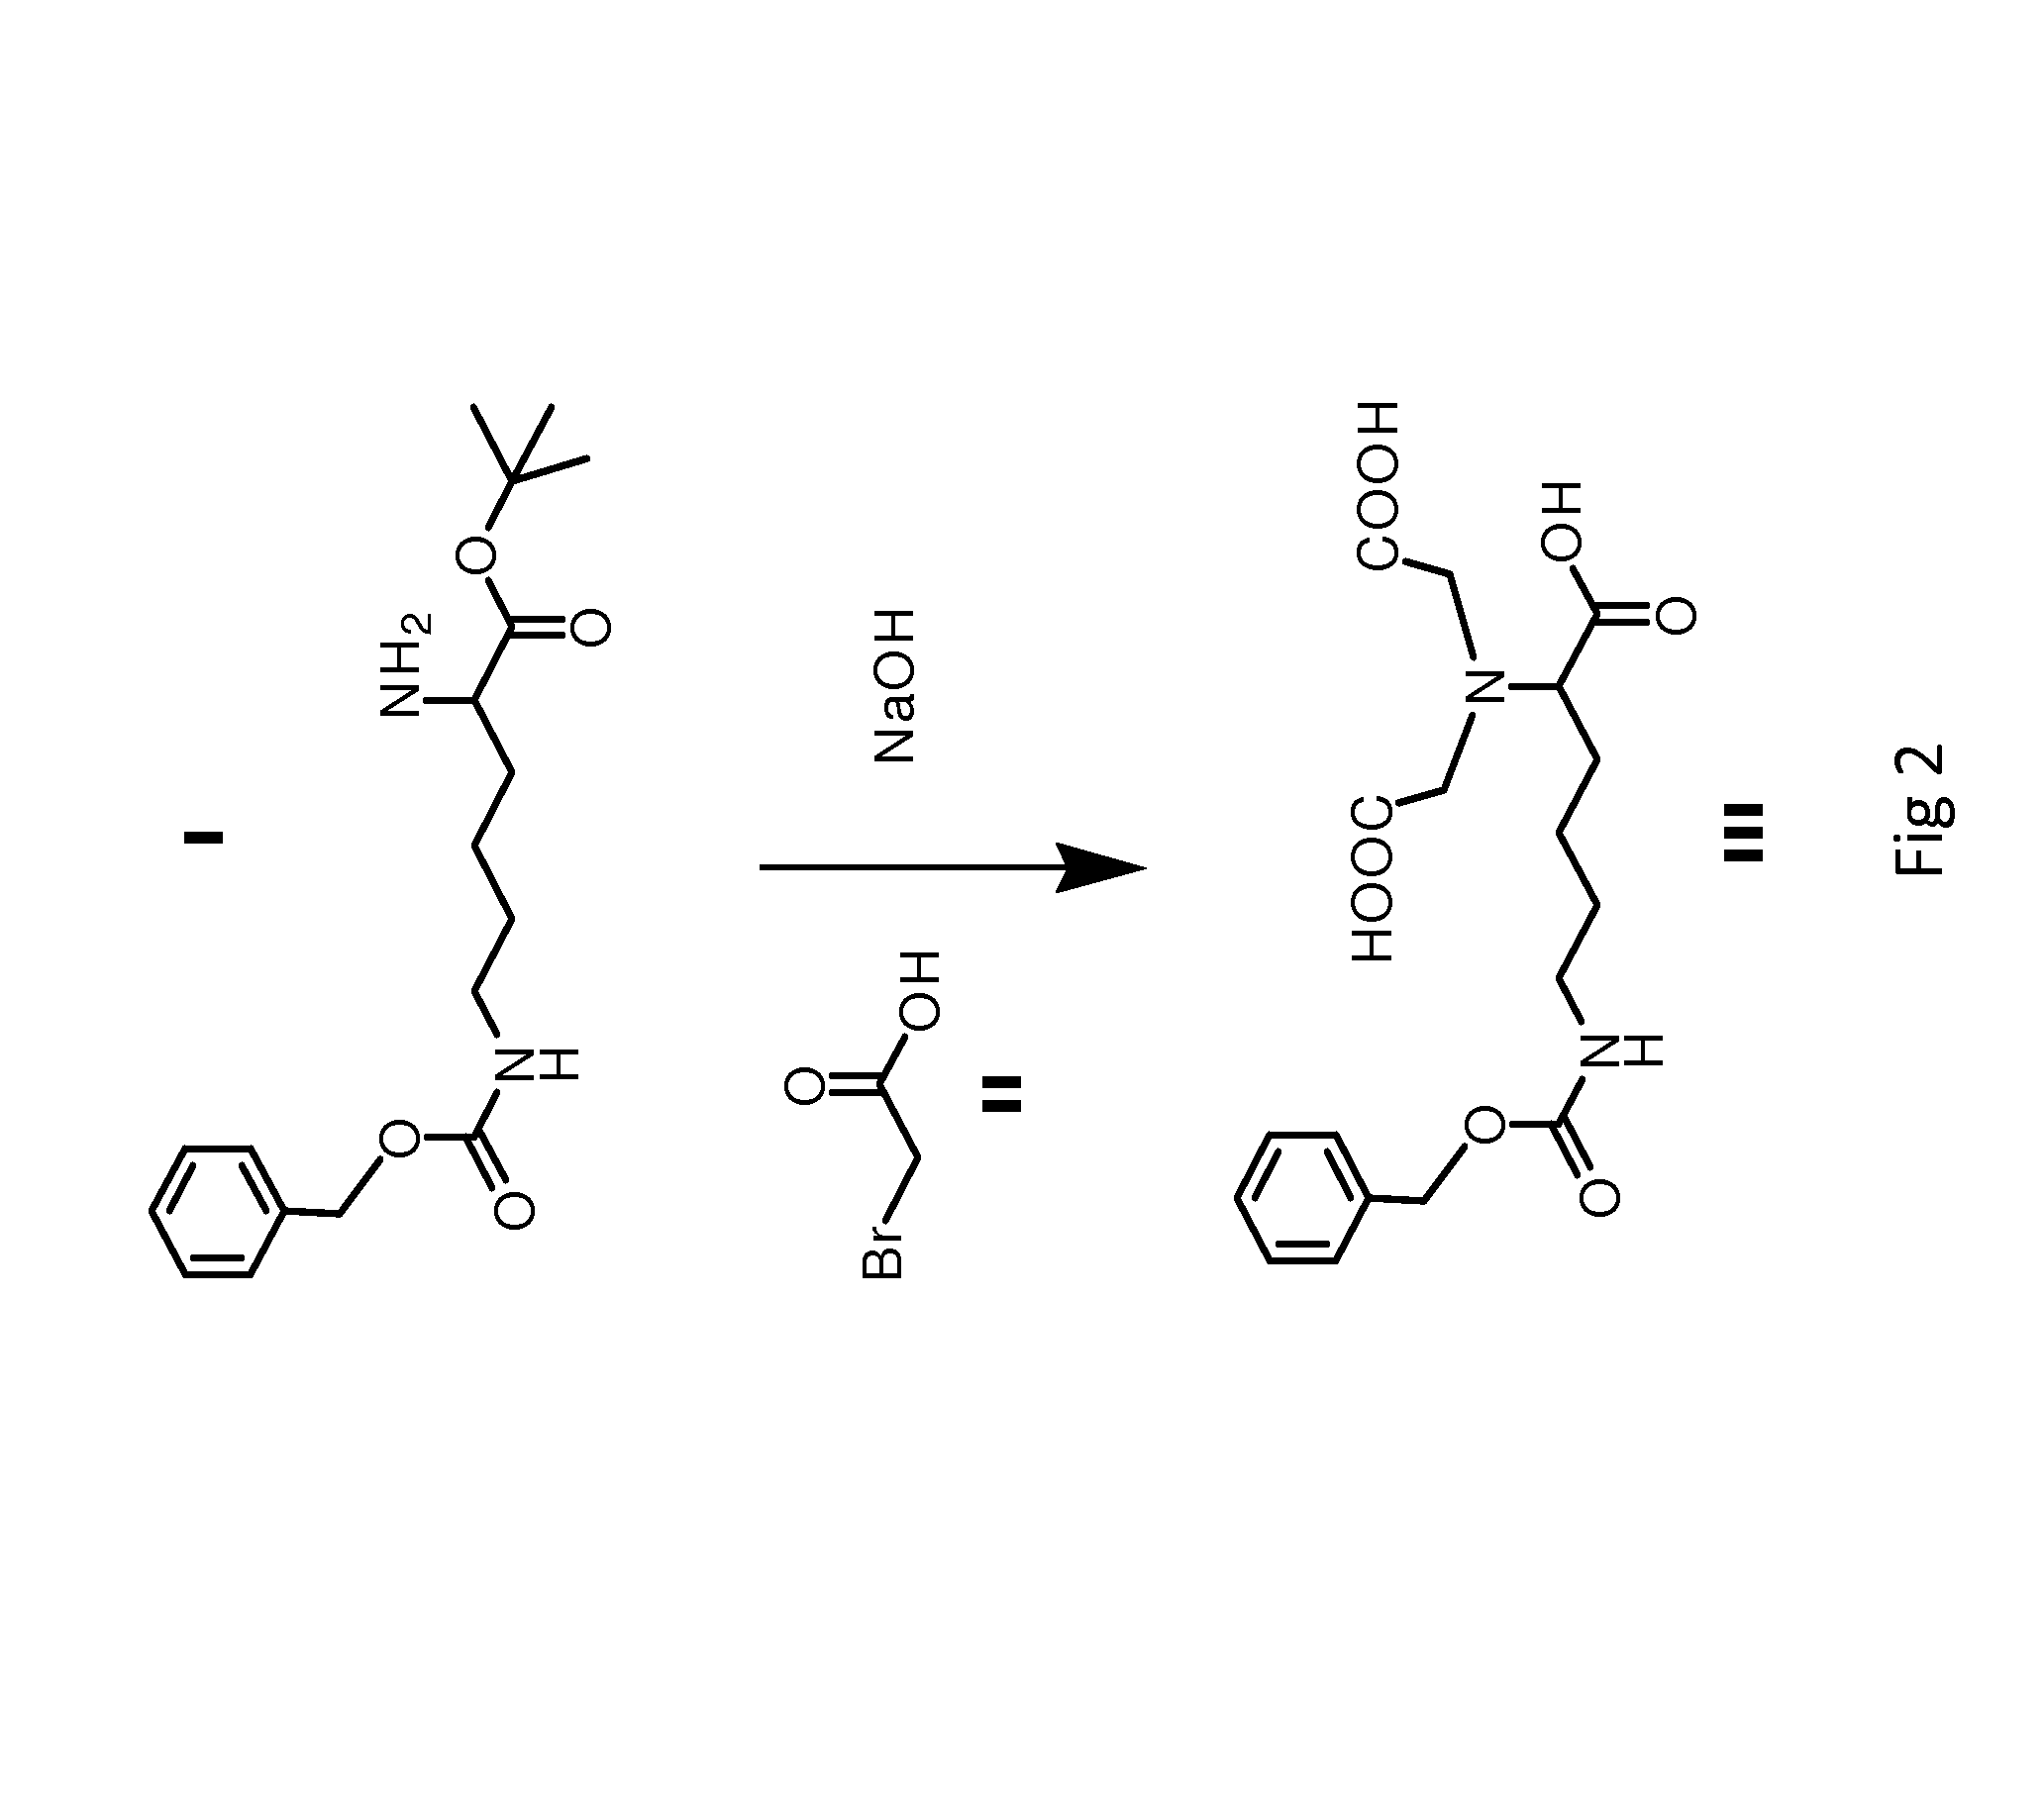 Liver-targeting agents and their synthesis